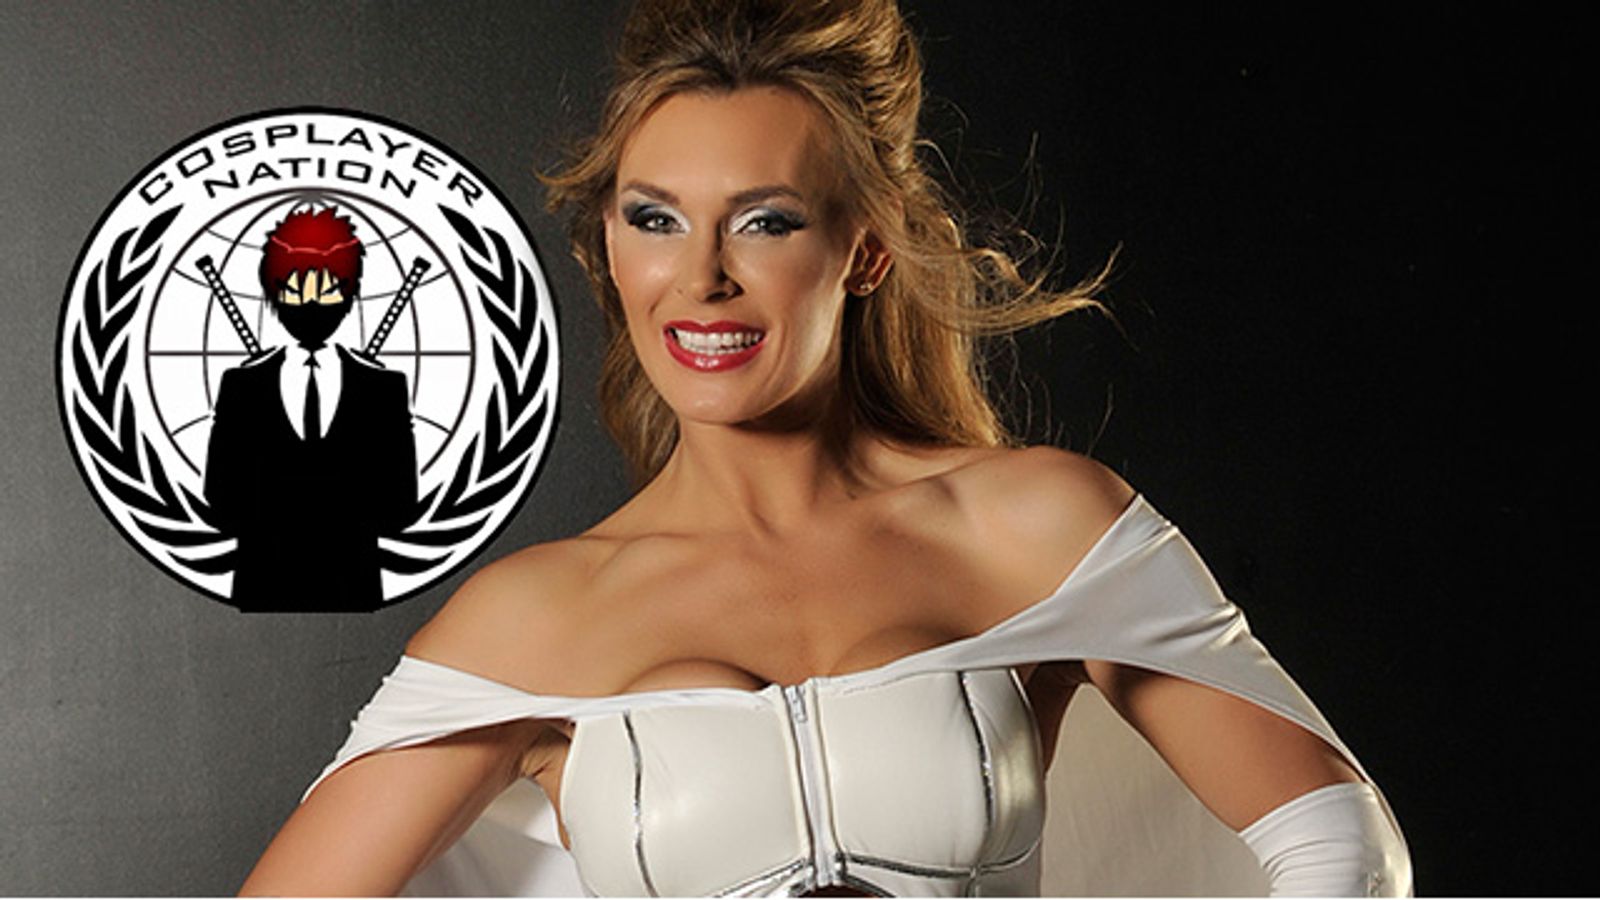 Tanya Tate Featured In 'Cosplayer Nation' Documentary